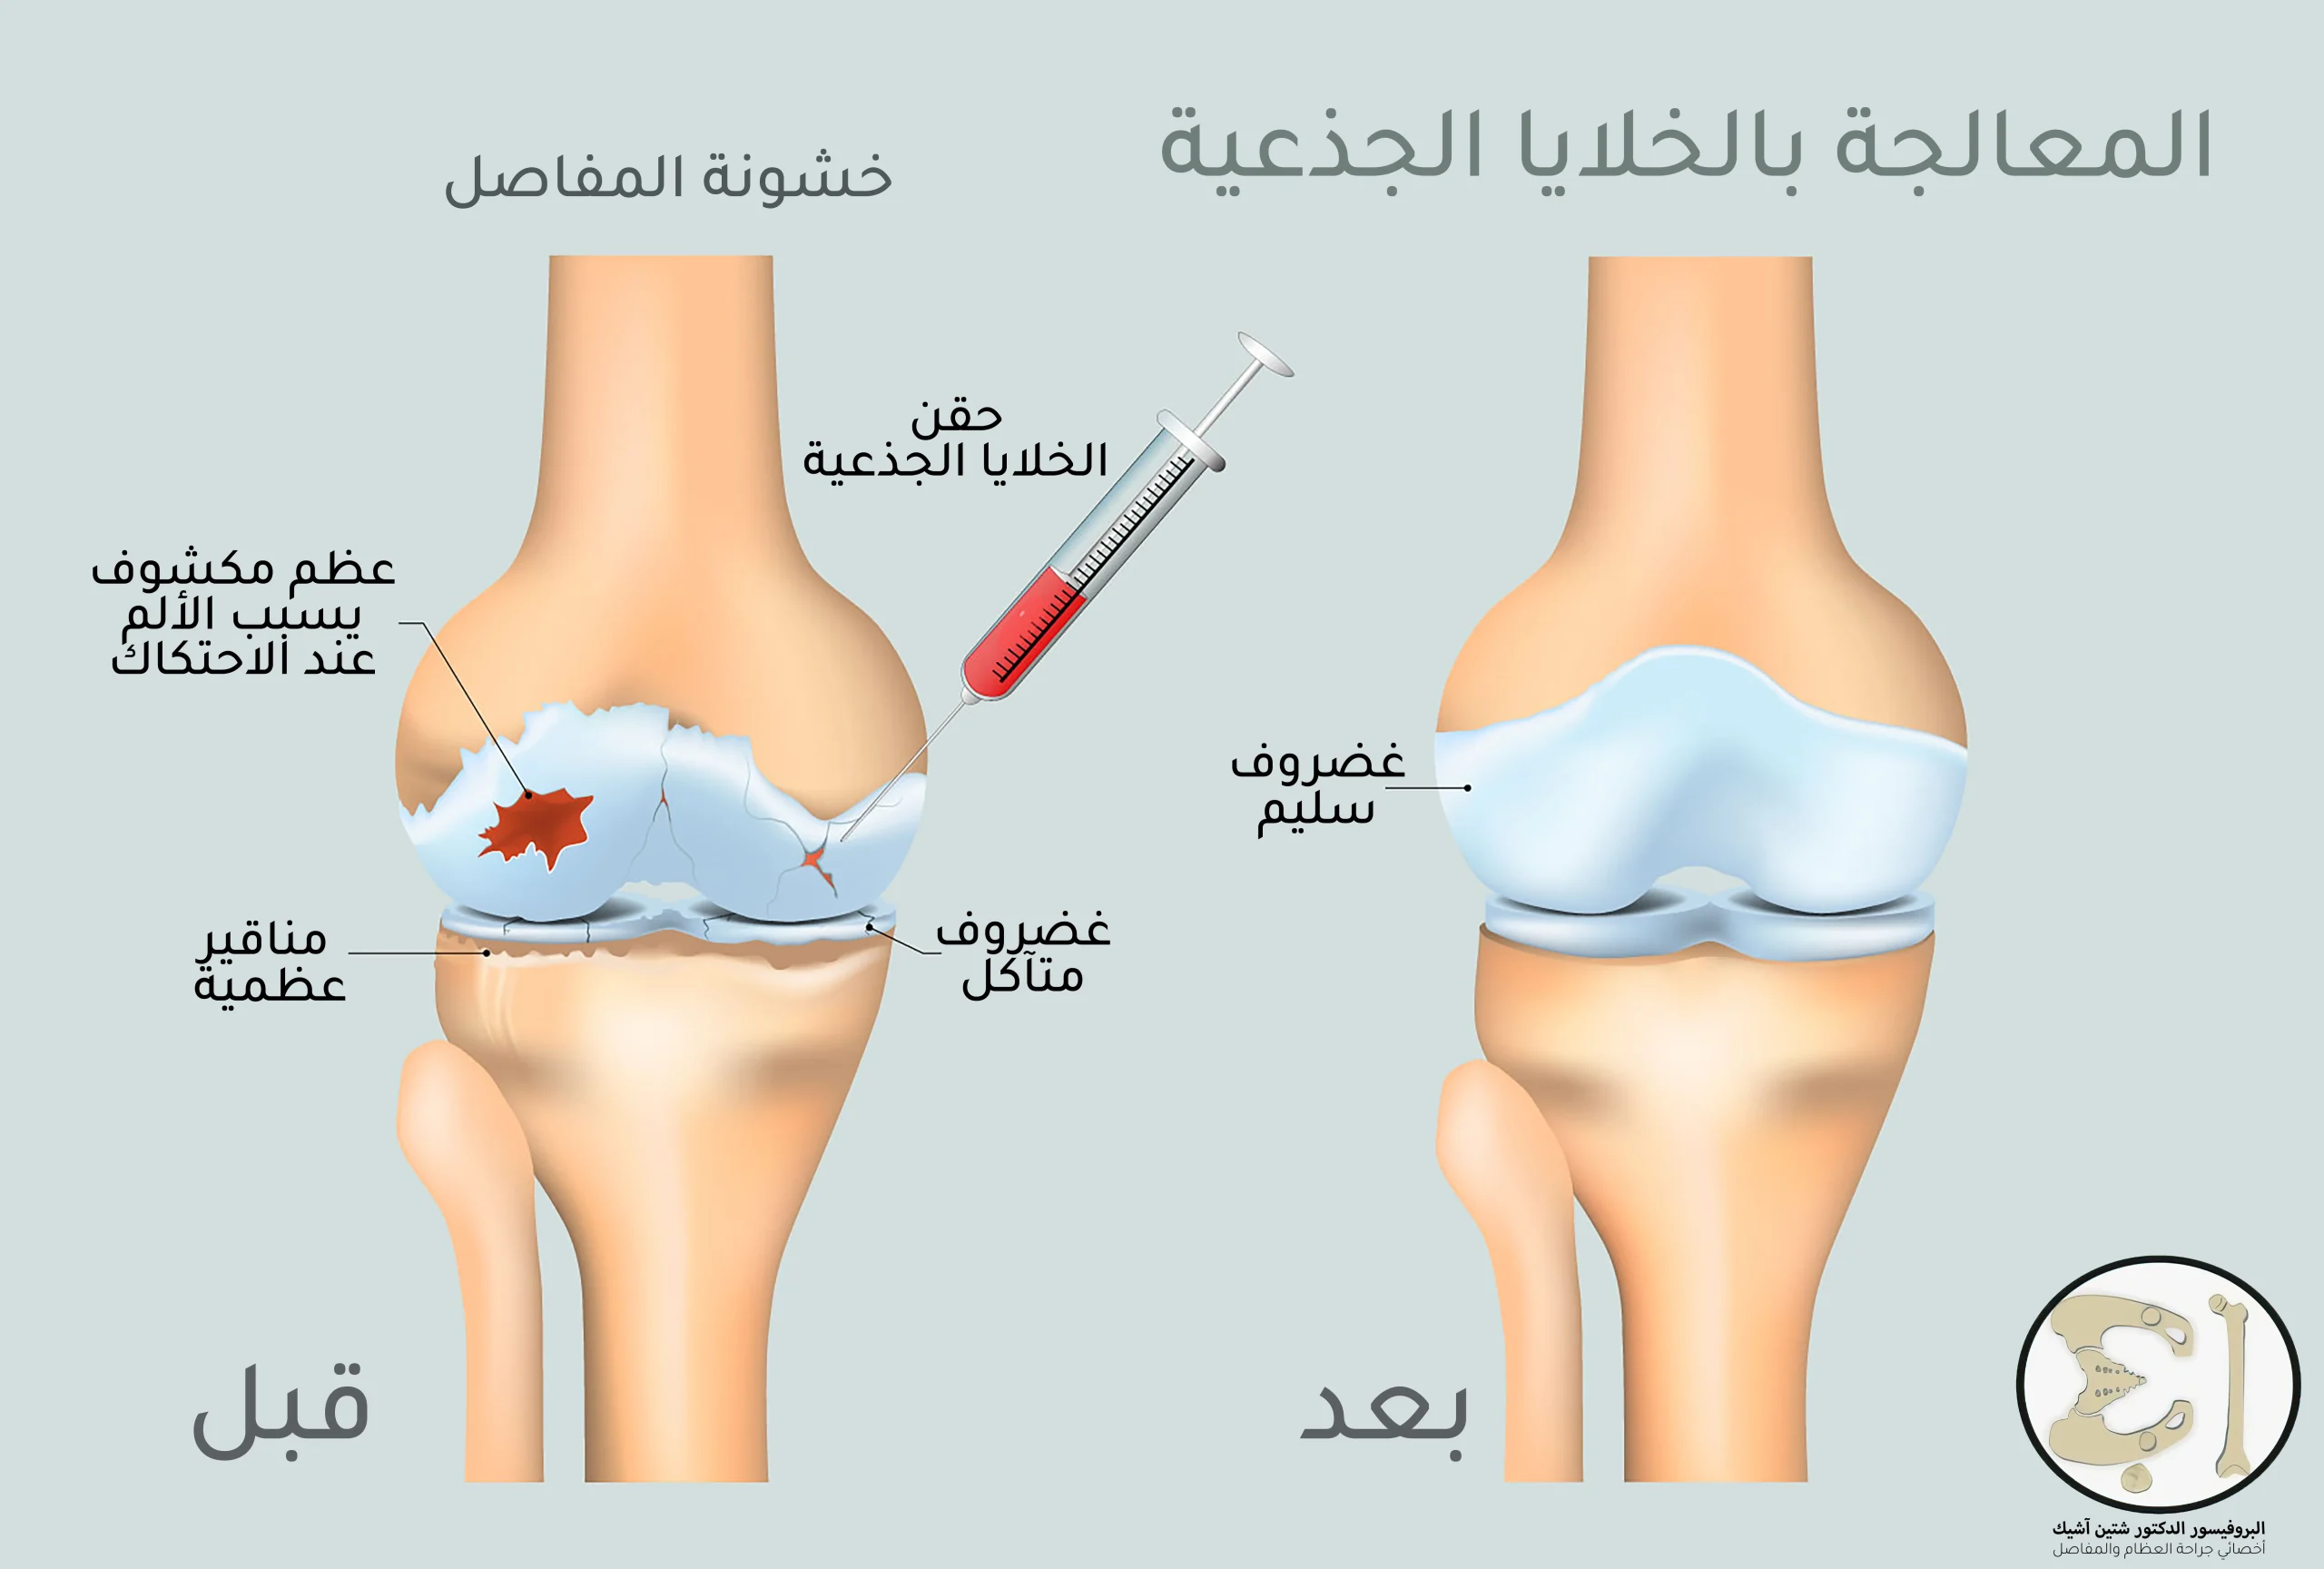 Stem cells are injected into the damaged knee joint to save the remaining cartilage or slow the process of degeneration.